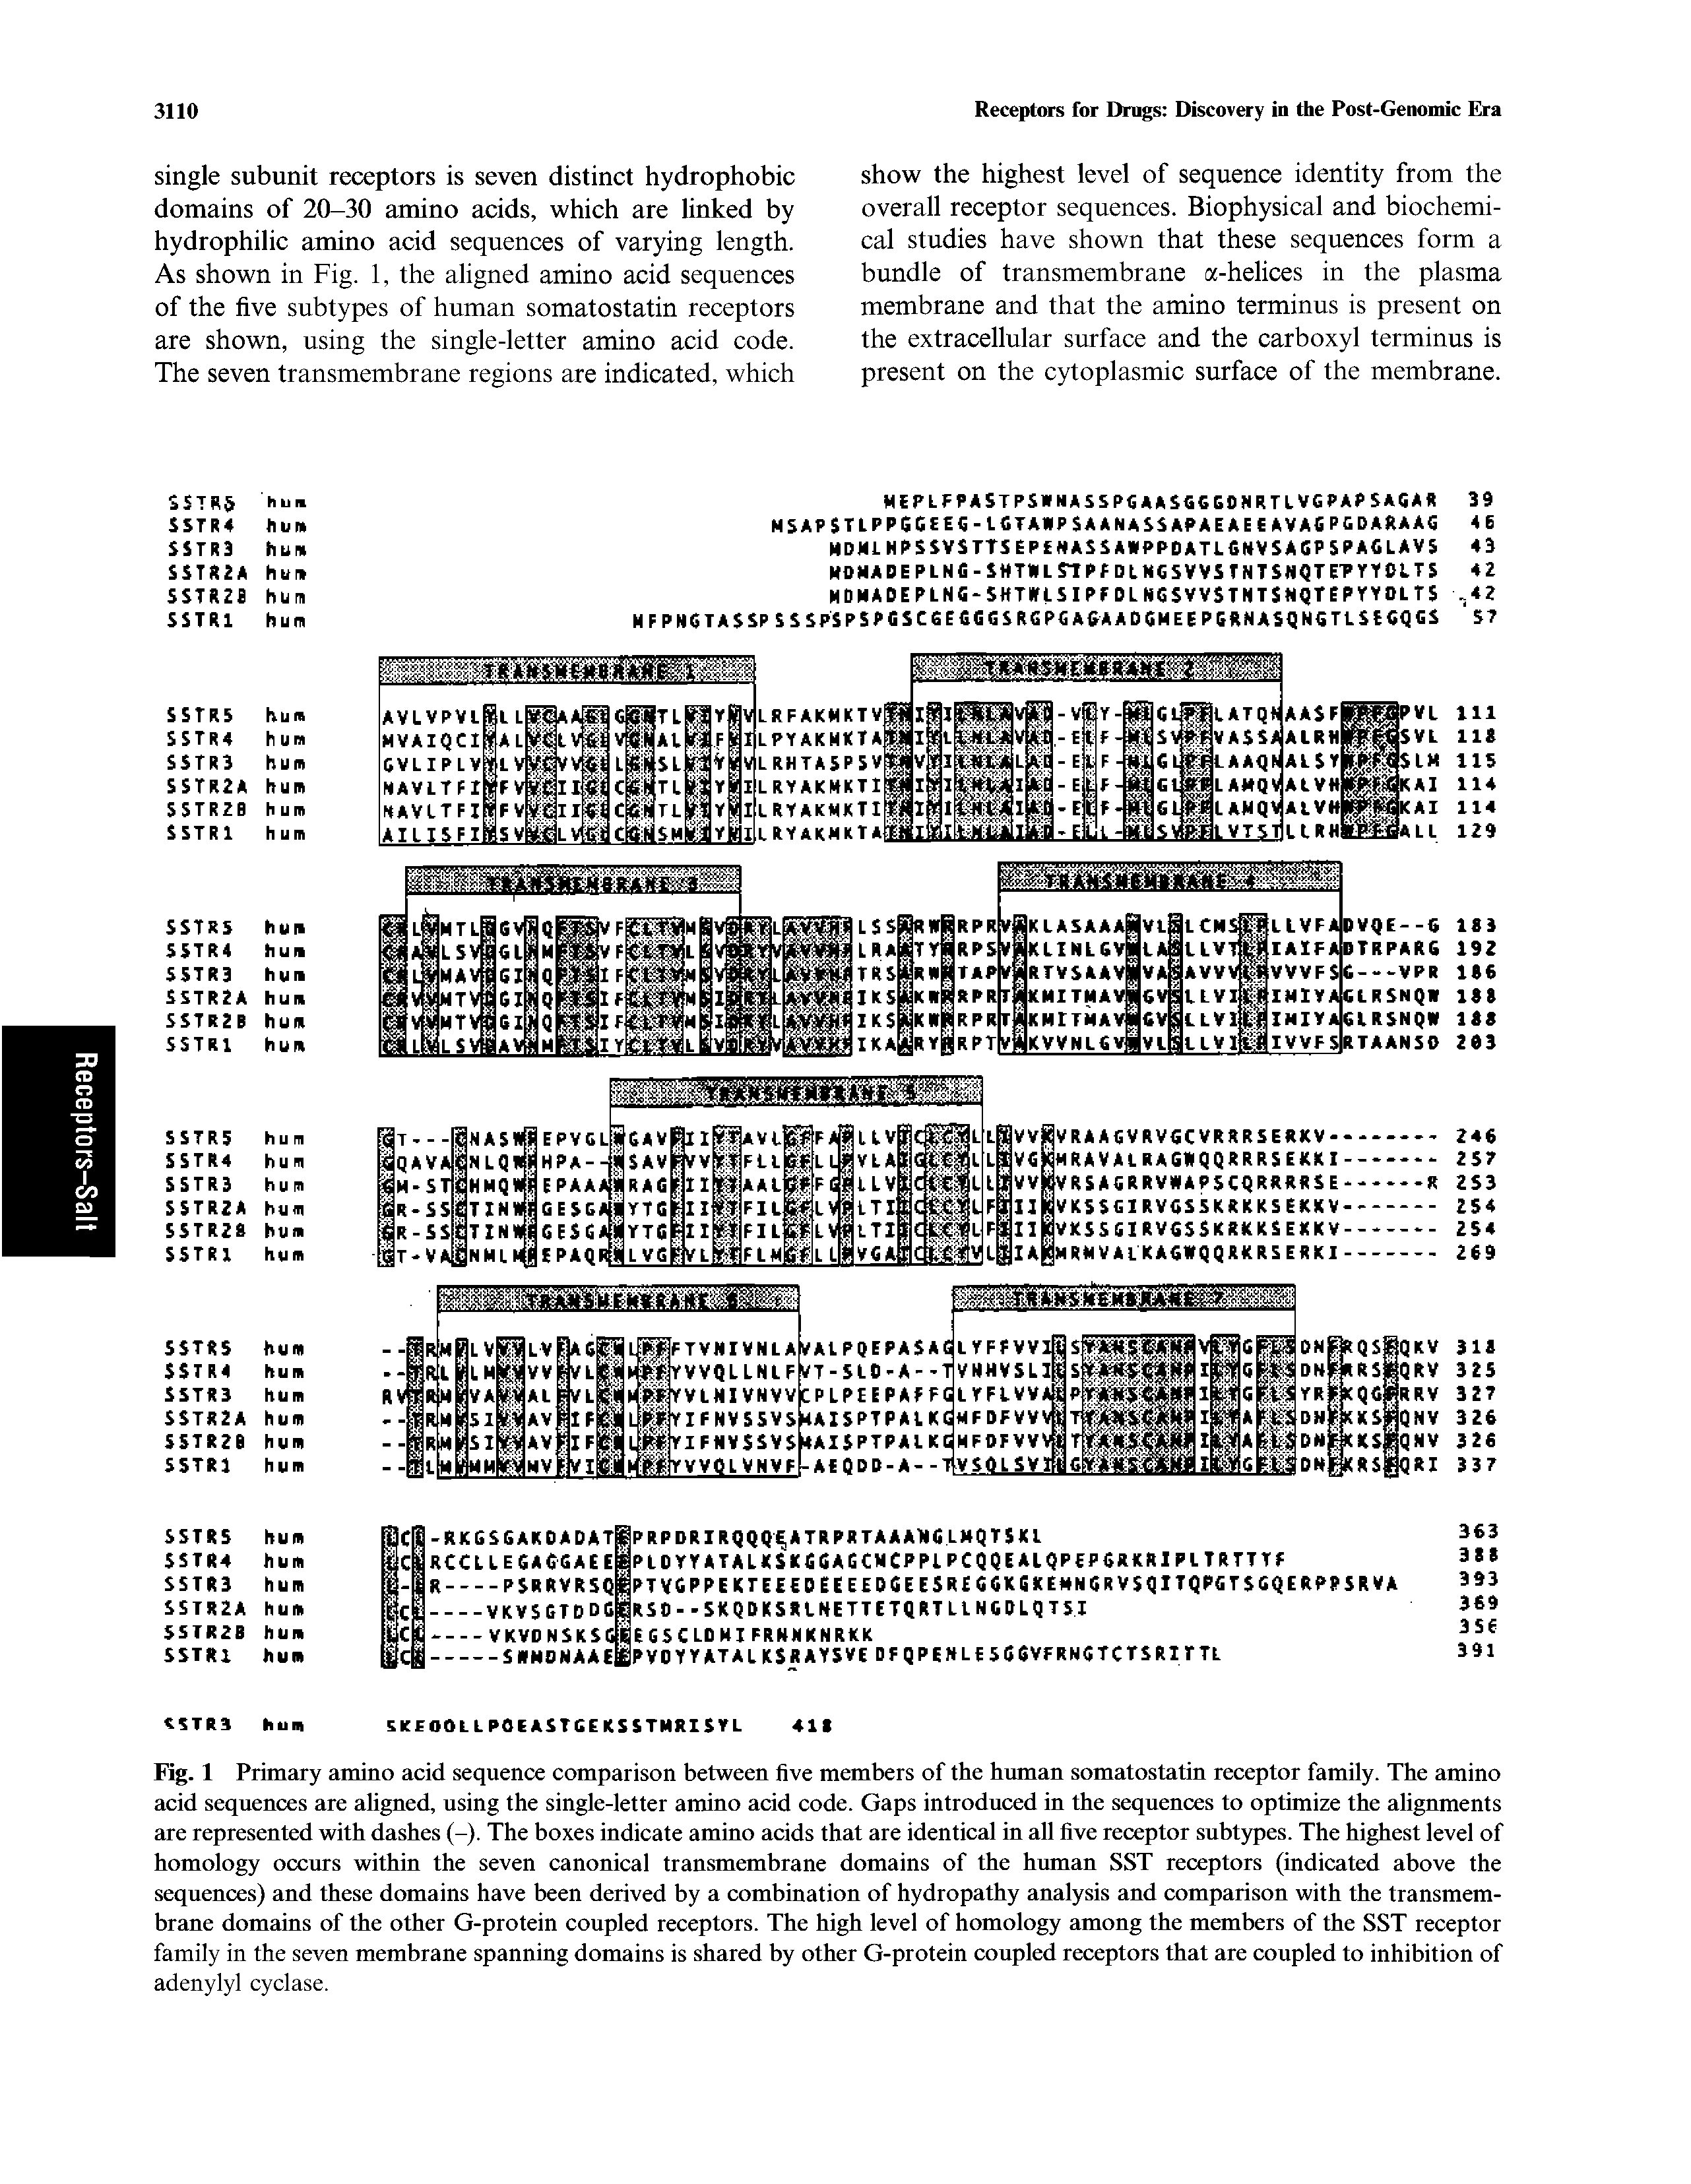 Fig. 1 Primary amino acid sequence comparison between five members of the human somatostatin receptor family. The amino acid sequences are aligned, using the single-letter amino acid code. Gaps introduced in the sequences to optimize the alignments are represented with dashes (-). The boxes indicate amino acids that are identical in all five receptor subtypes. The highest level of homology occurs within the seven canonical transmembrane domains of the human SST receptors (indicated above the sequences) and these domains have been derived by a combination of hydropathy analysis and comparison with the transmembrane domains of the other G-protein coupled receptors. The high level of homology among the members of the SST receptor family in the seven membrane spanning domains is shared by other G-protein coupled receptors that are coupled to inhibition of adenylyl cyclase.